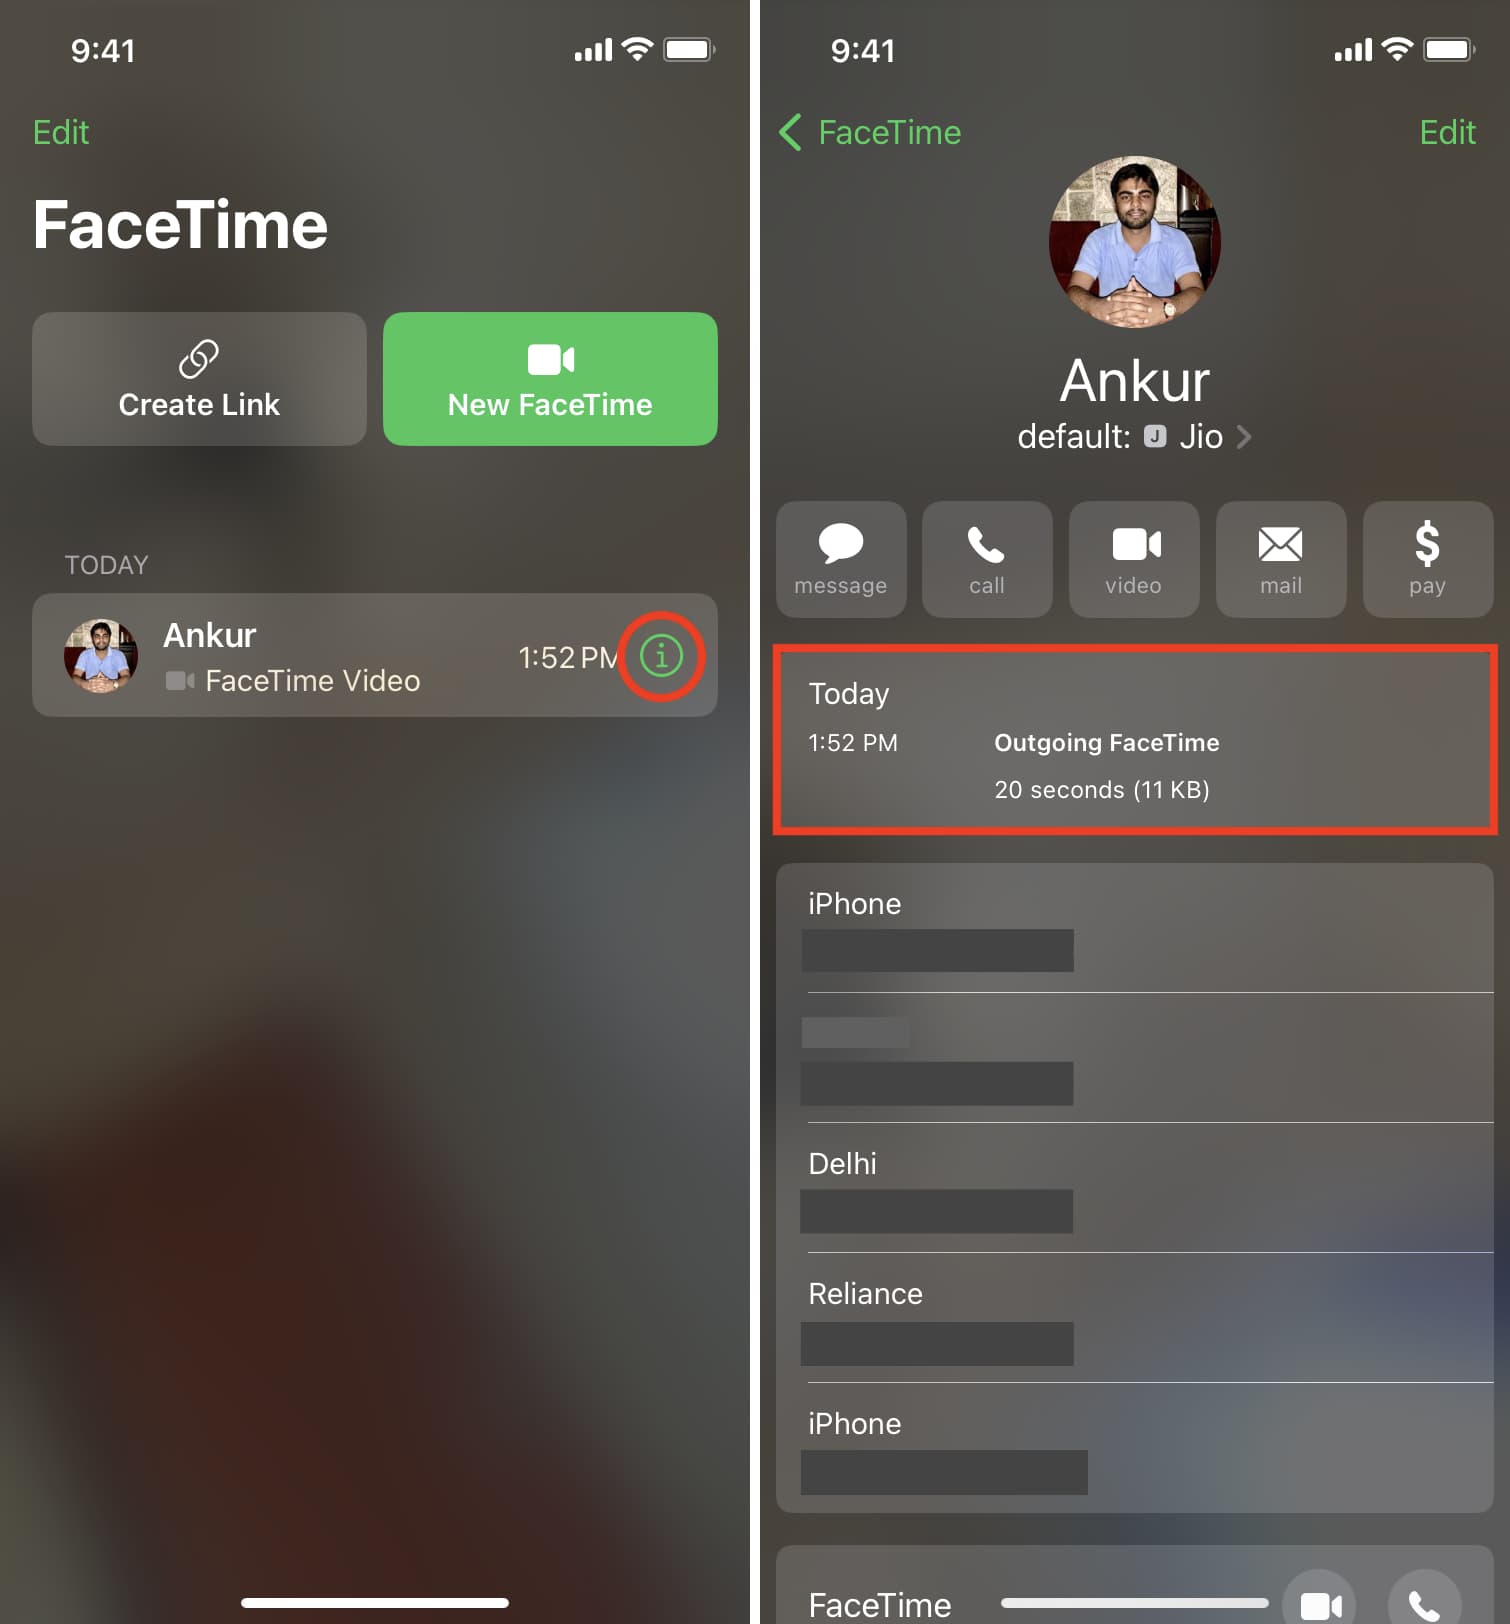 Check FaceTime call duration in the FaceTime app on iPhone